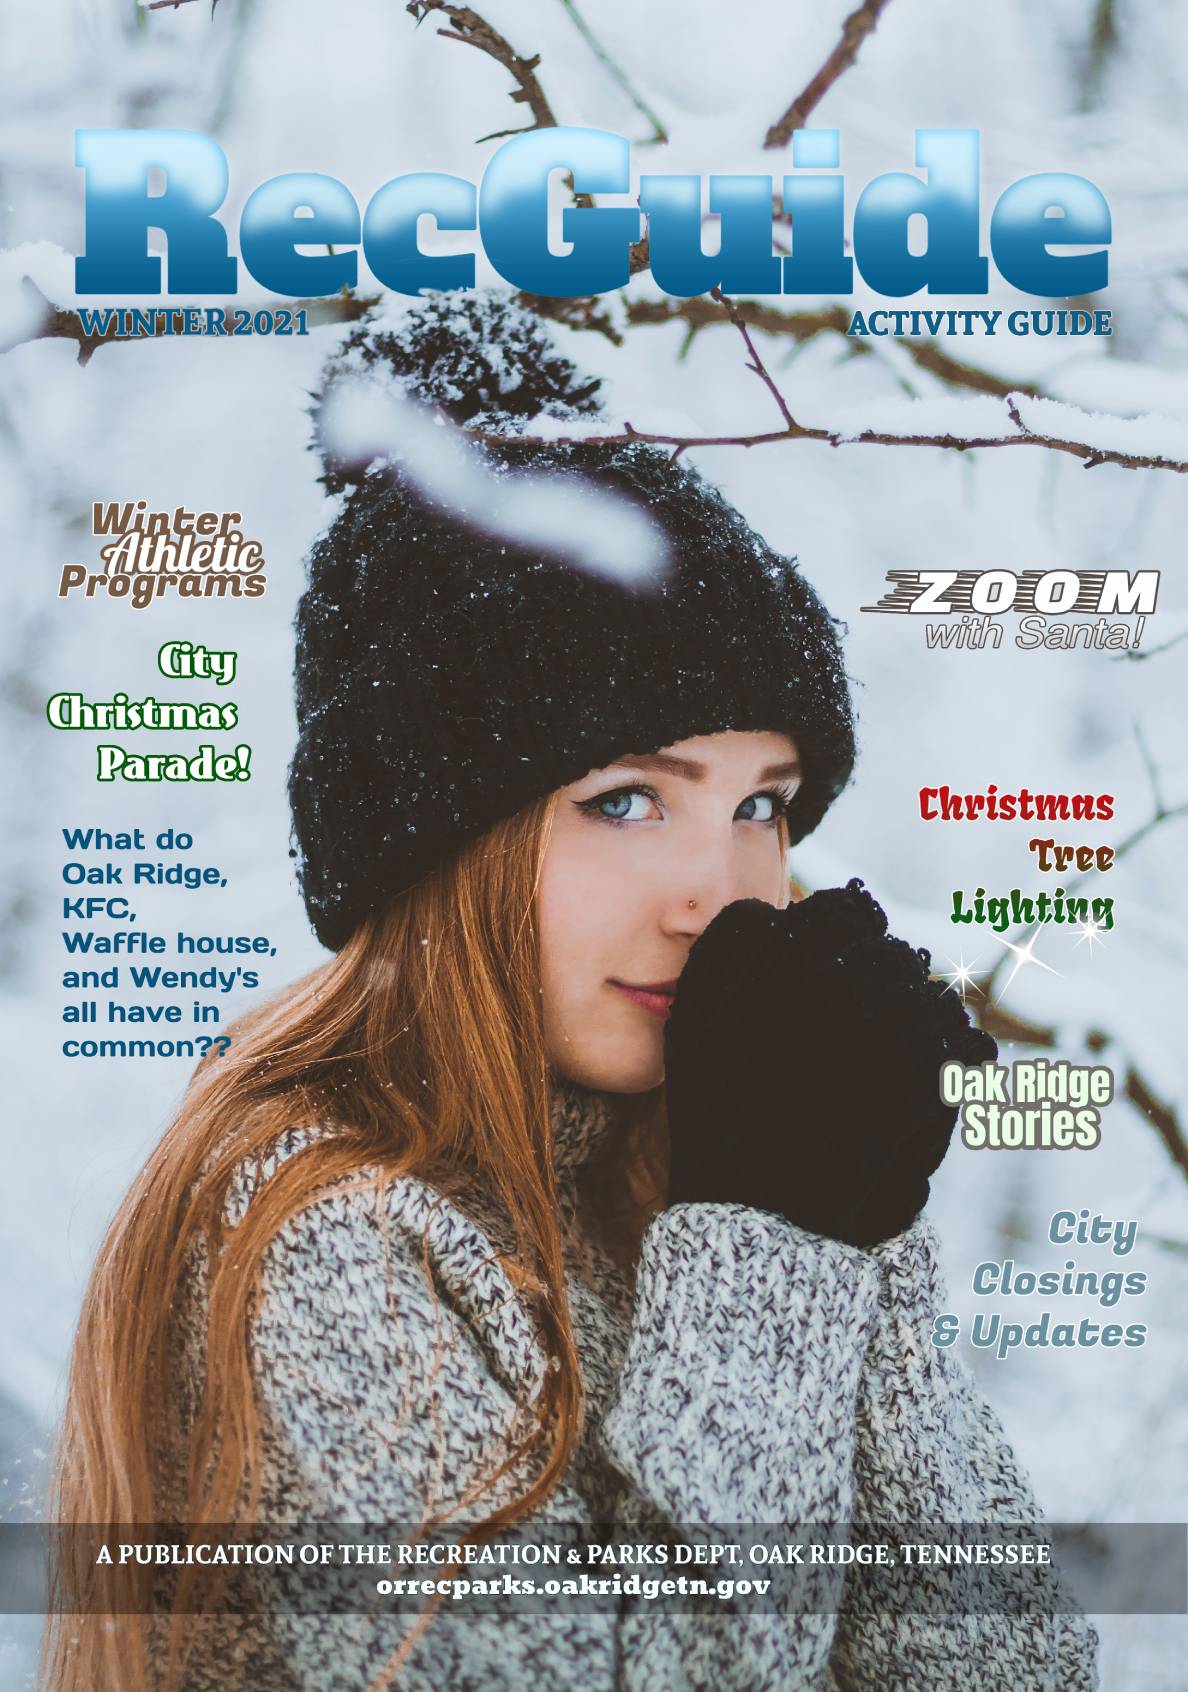 The Winter Issue of RecGuide